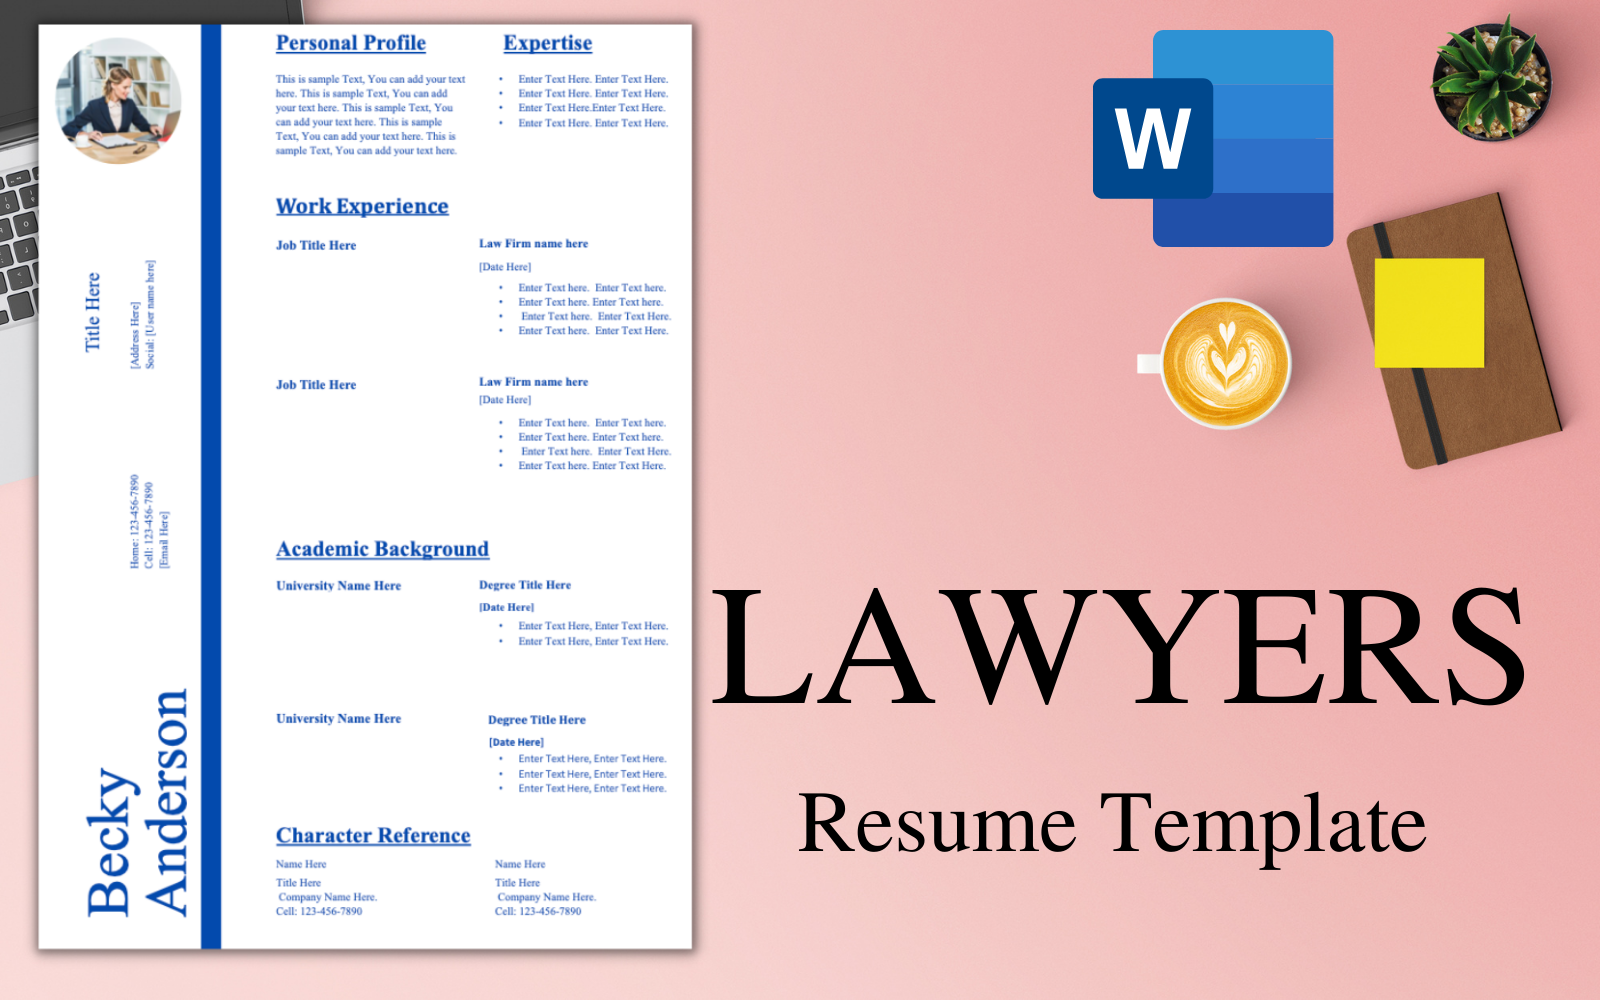 ONE-PAGE Resume / CV Template for Lawyers.